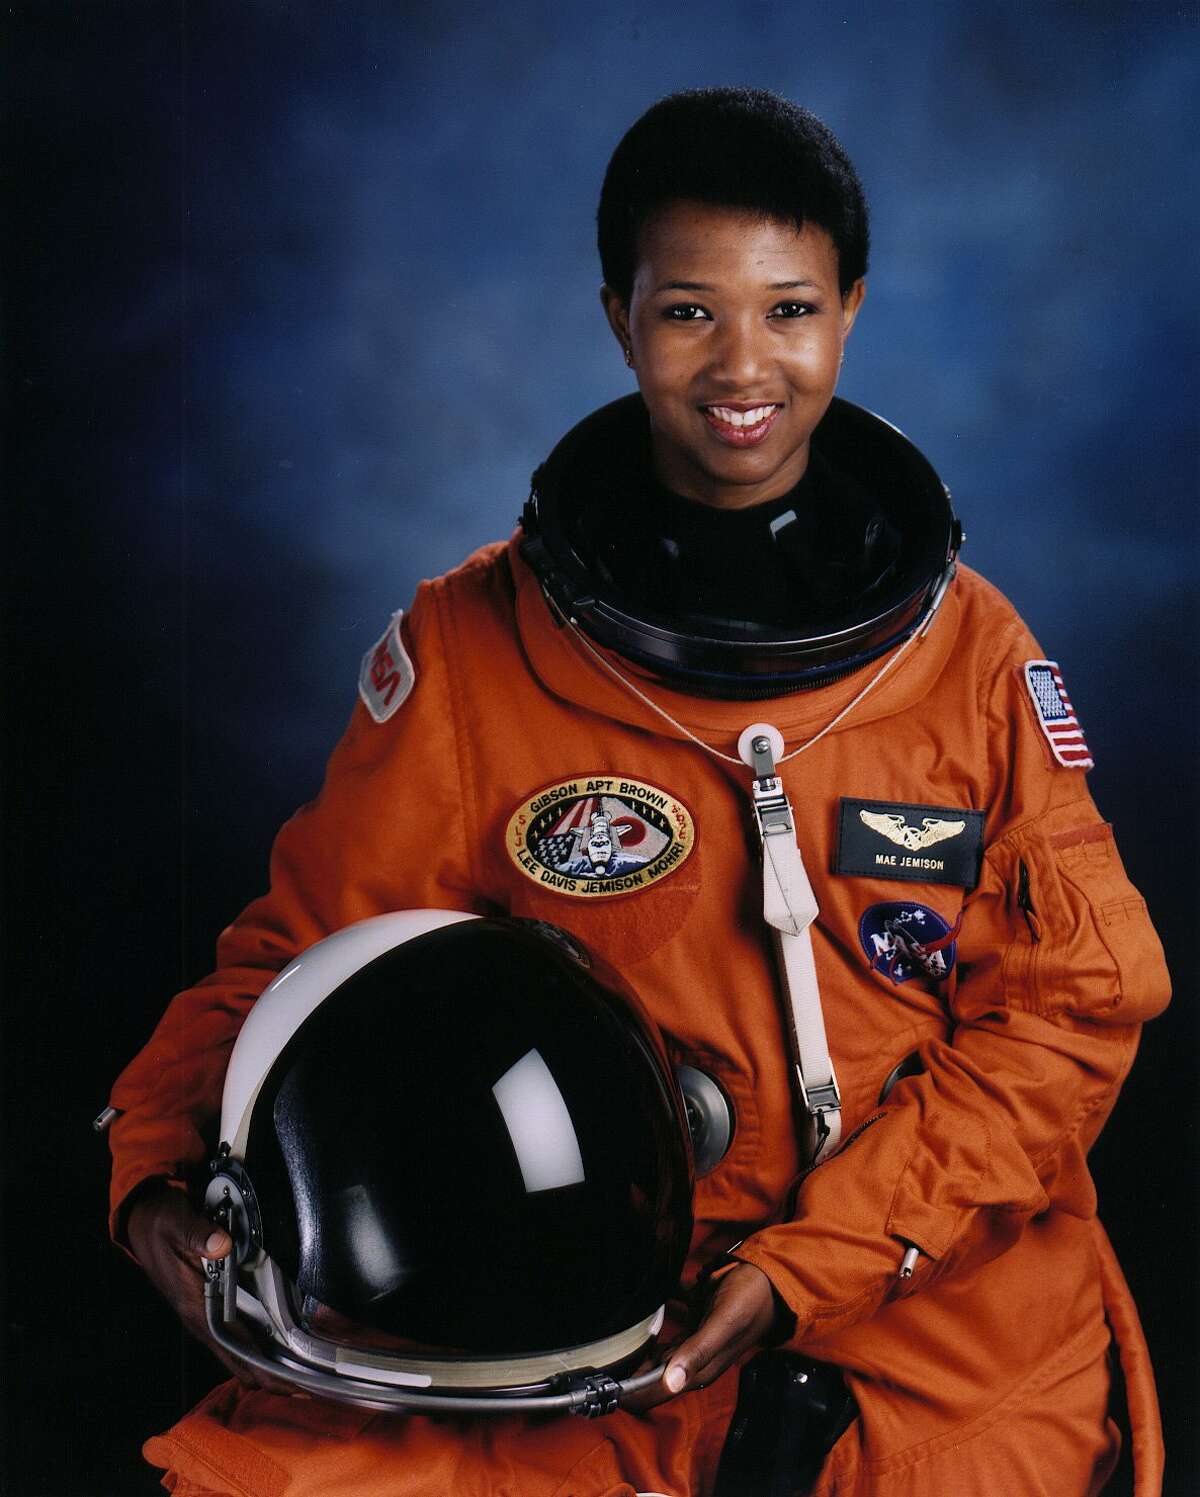 From physician to astronaut to entrepreneur Mae Jemison was a science mission specialist for a collaborative mission between the United States and Japan on her shuttle flight, when they conducted bone cell research while in orbit. Although Jemison left NASA in 1993 — teaching at Cornell University and Dartmouth College before founding her own company, the Jemison group — her contributions to space exploration remain. 